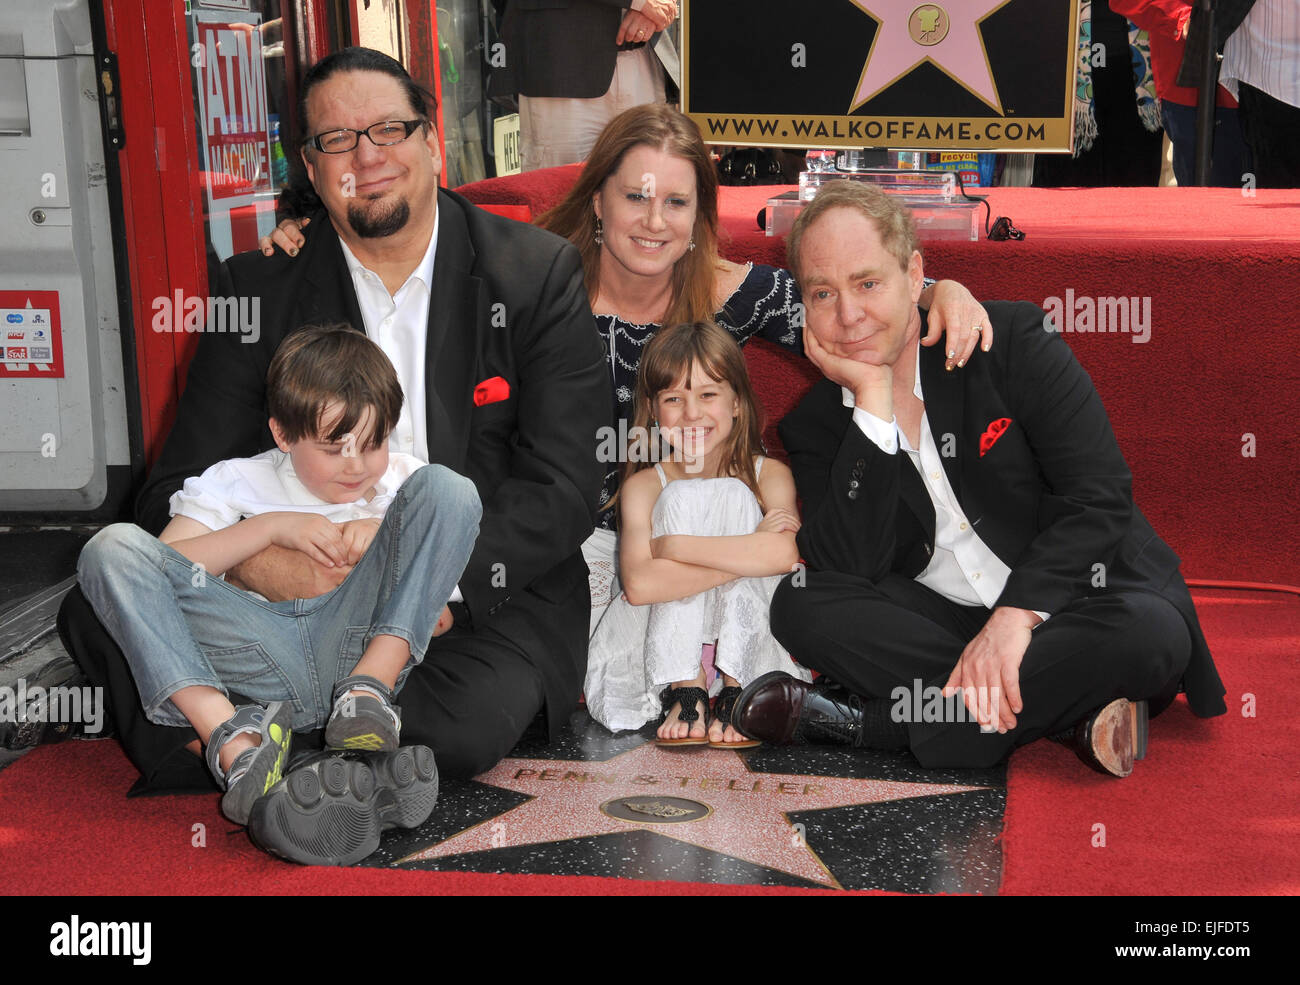 LOS ANGELES, CA - APRIL 5, 2013: Magicians Penn Jillette (left) & Raymond  Teller with Penn's children Zolten & Moxie Crimefighter & wife Emily Zolten  on Hollywood Boulevard where they were honored